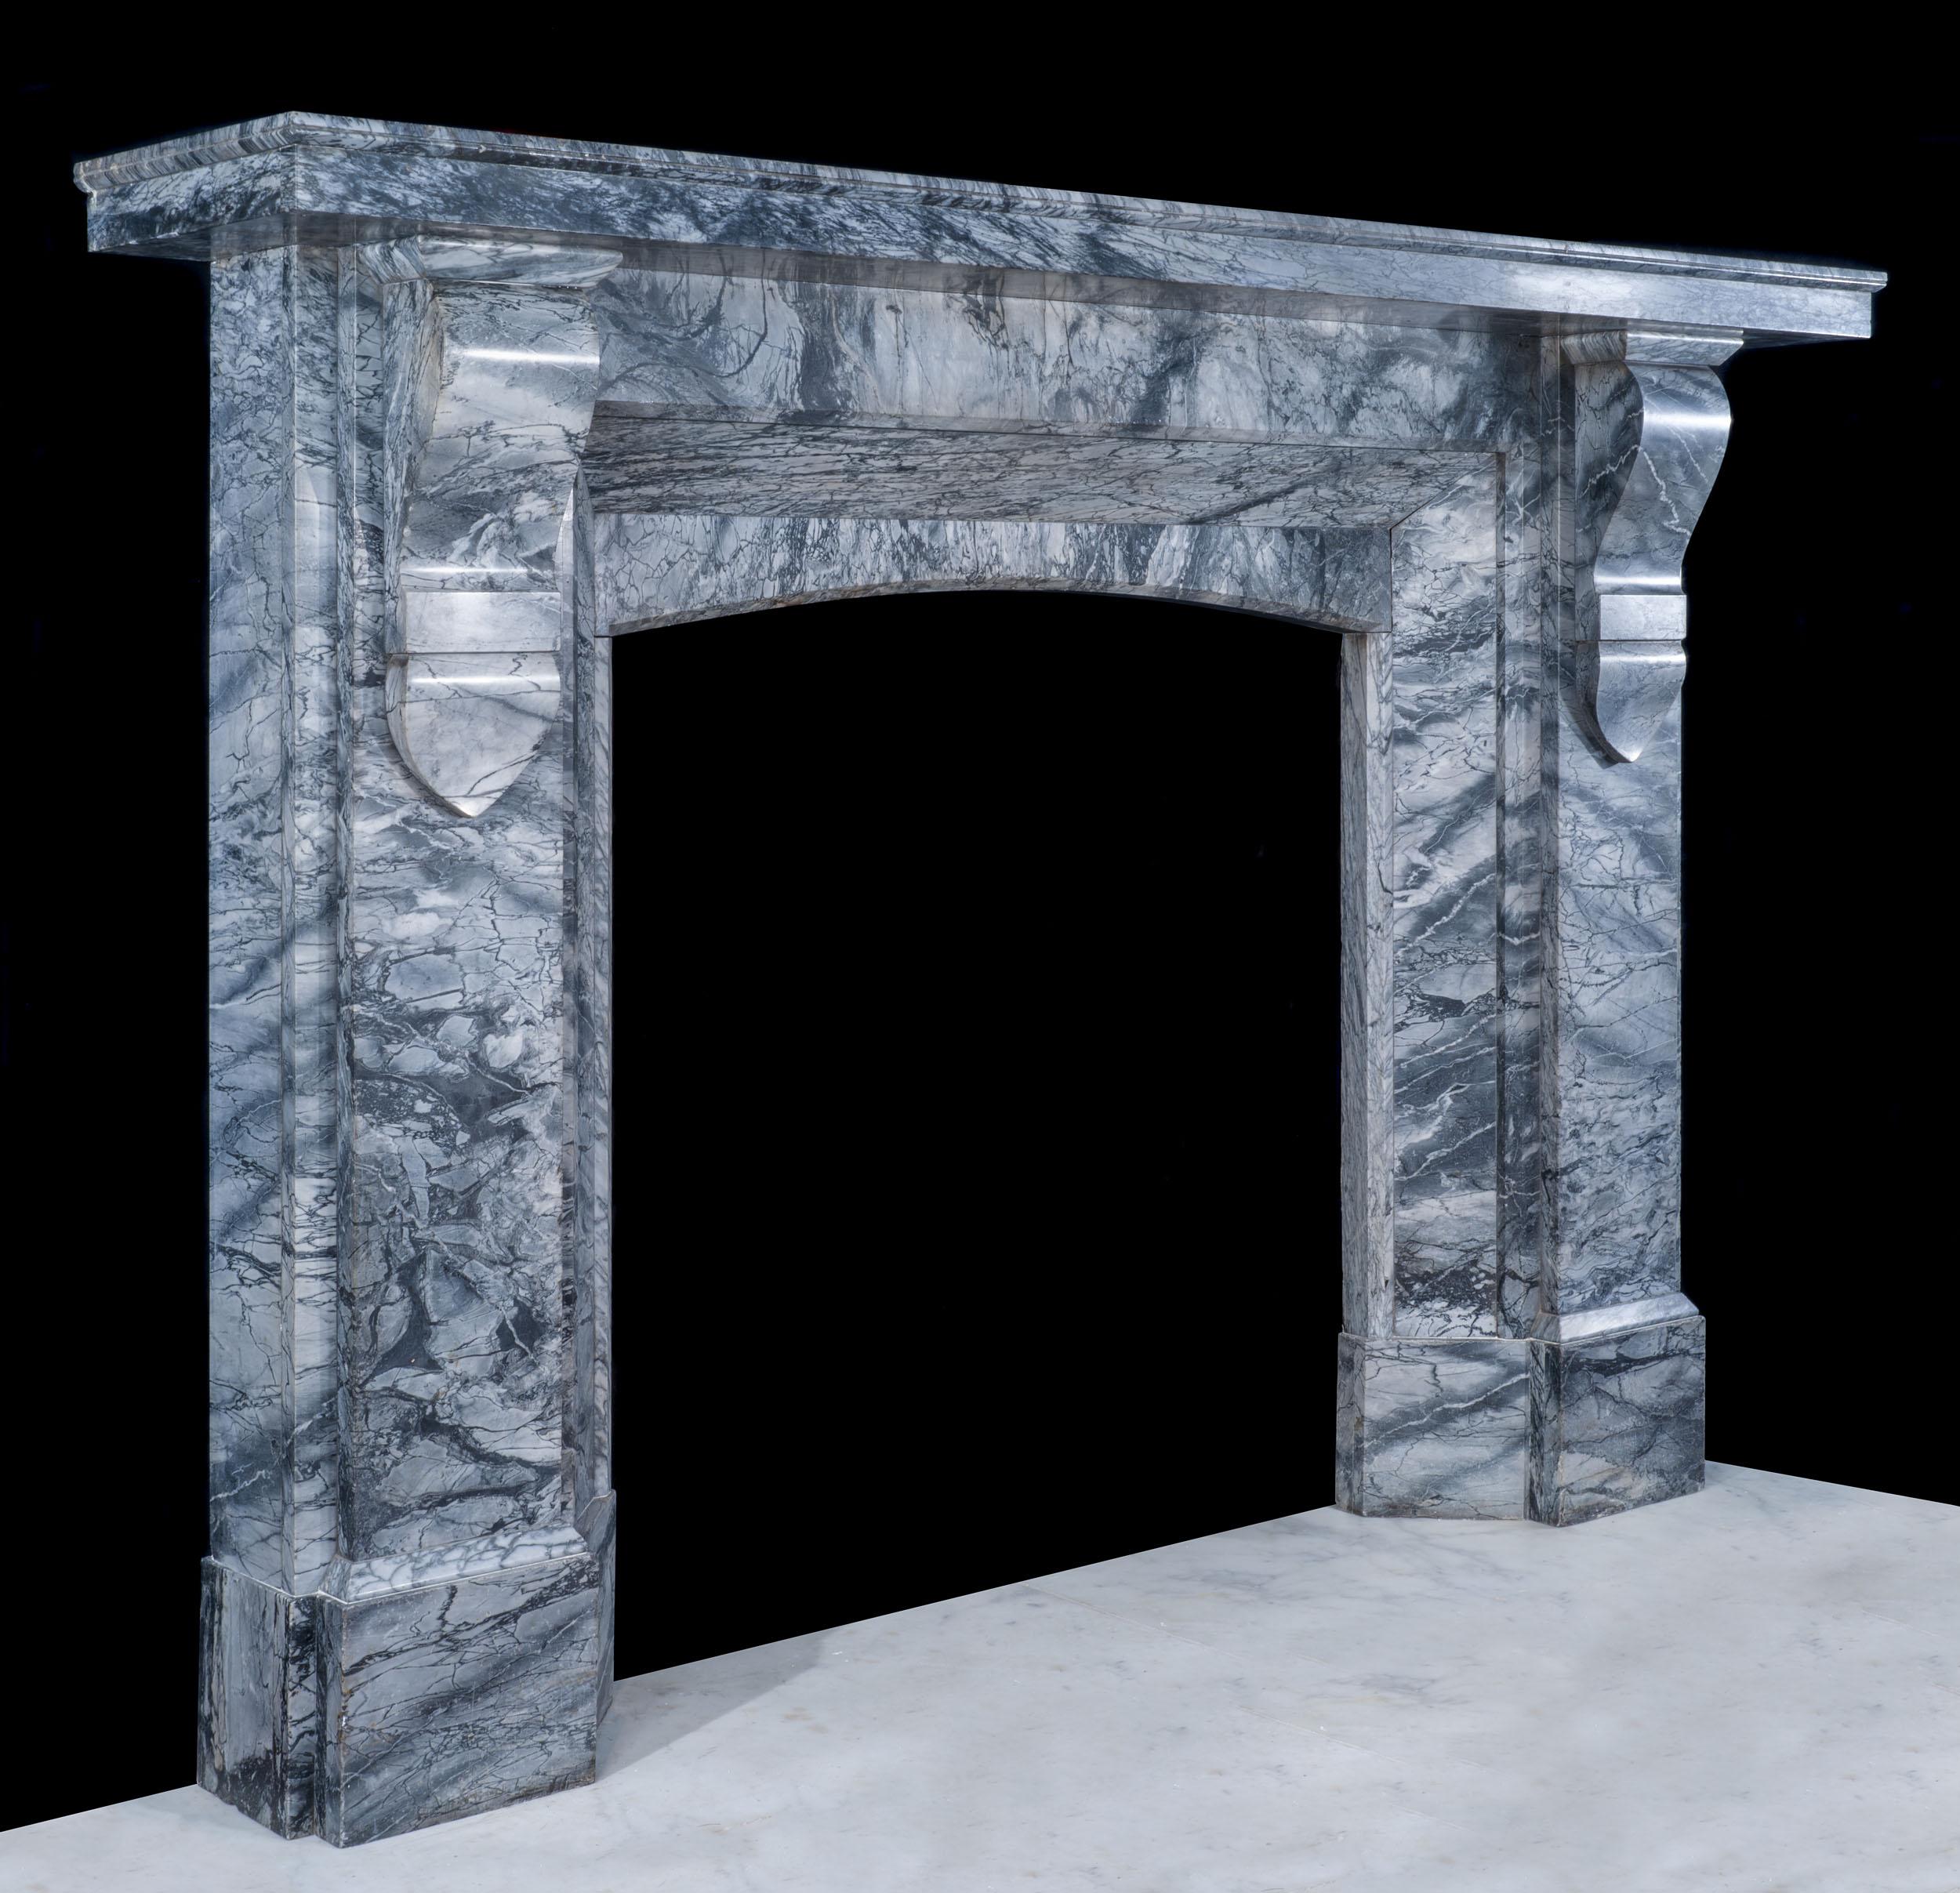 A really striking and large Victorian fireplace in Bardiglio Fiorito marble. The wide and deep shelf is supported by simple corbels on plan jambs. The angled inner returns are a really unusual feature and give this fireplace a substantial